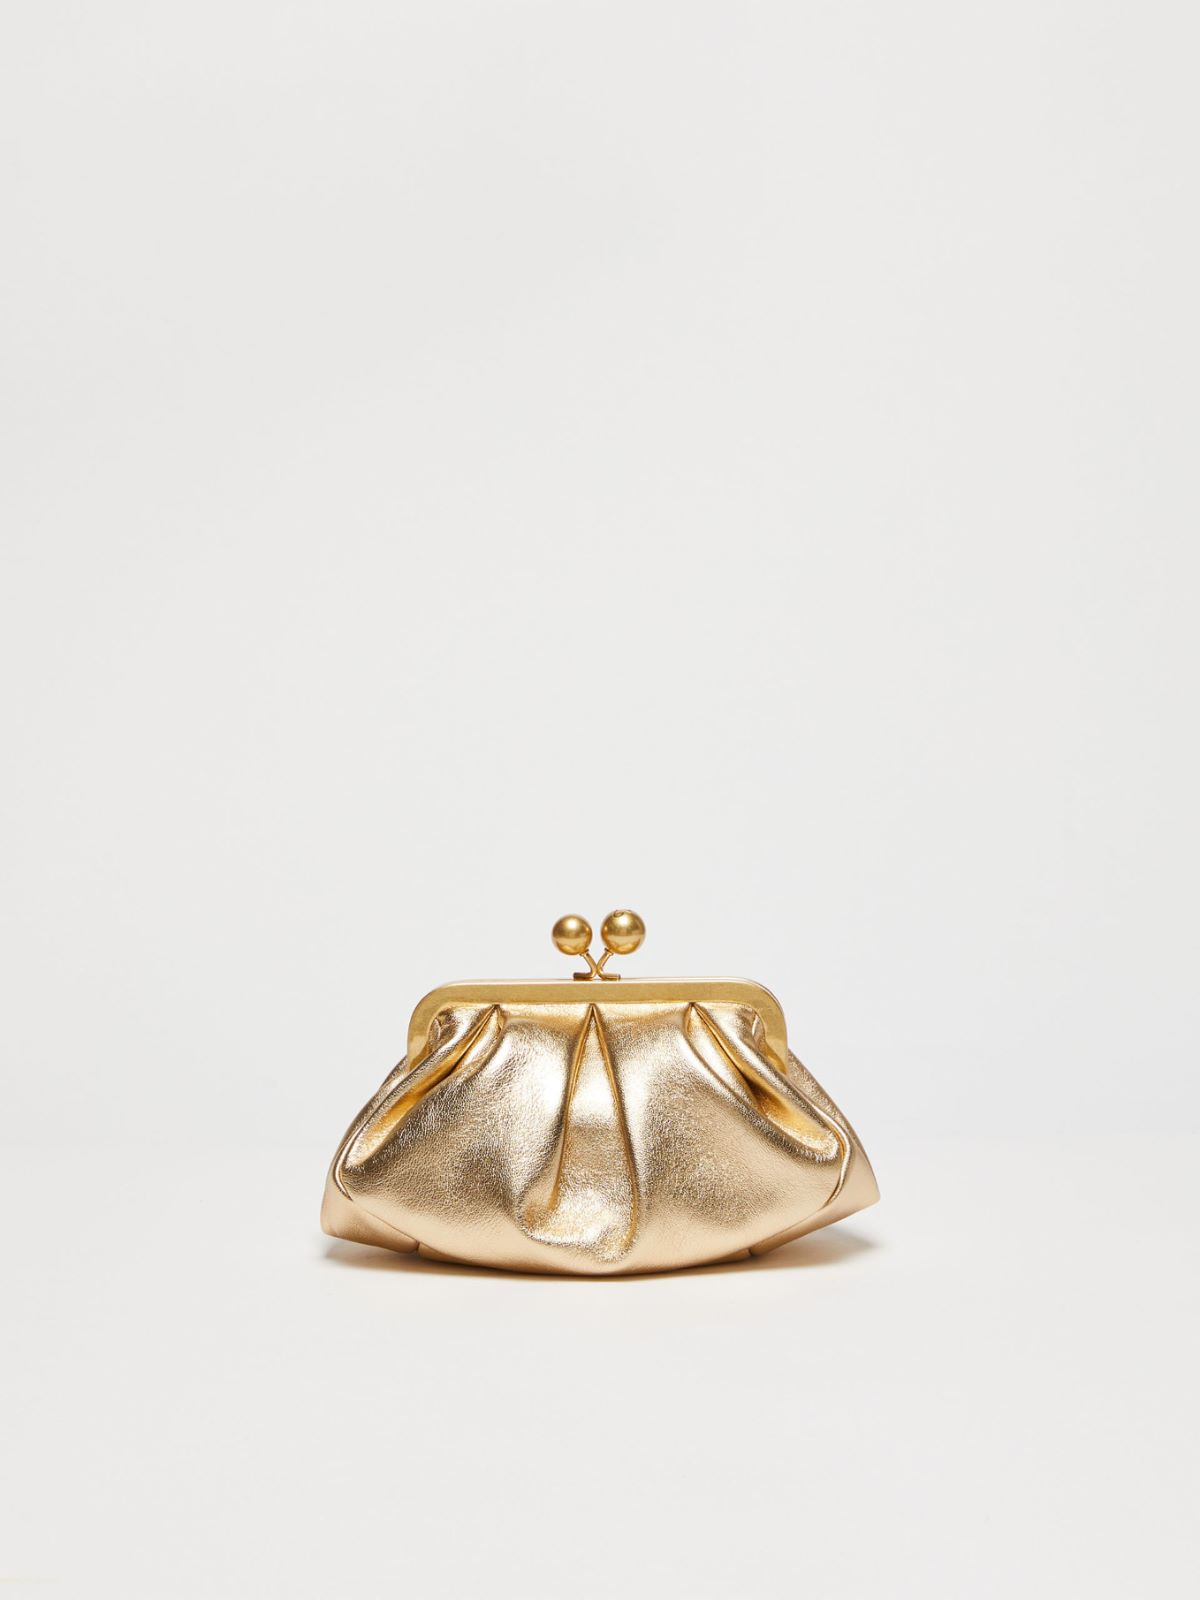 Small Pasticcino Bag in laminated nappa leather - GOLD - Weekend Max Mara - 3